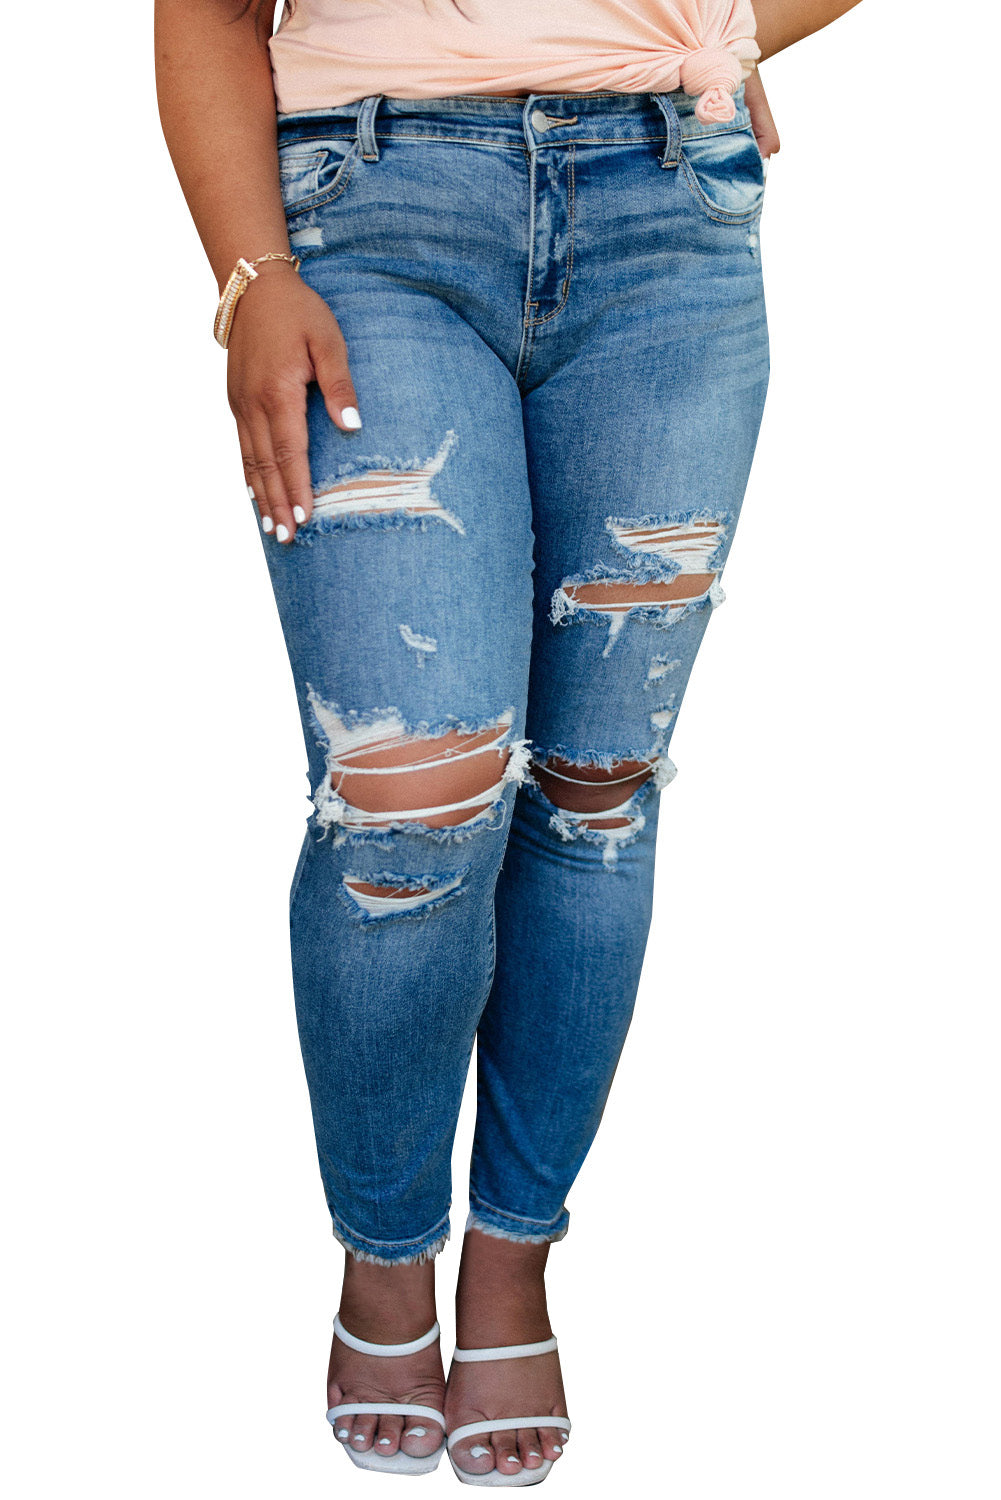 Something To Remember Plus Size Denim Jeans